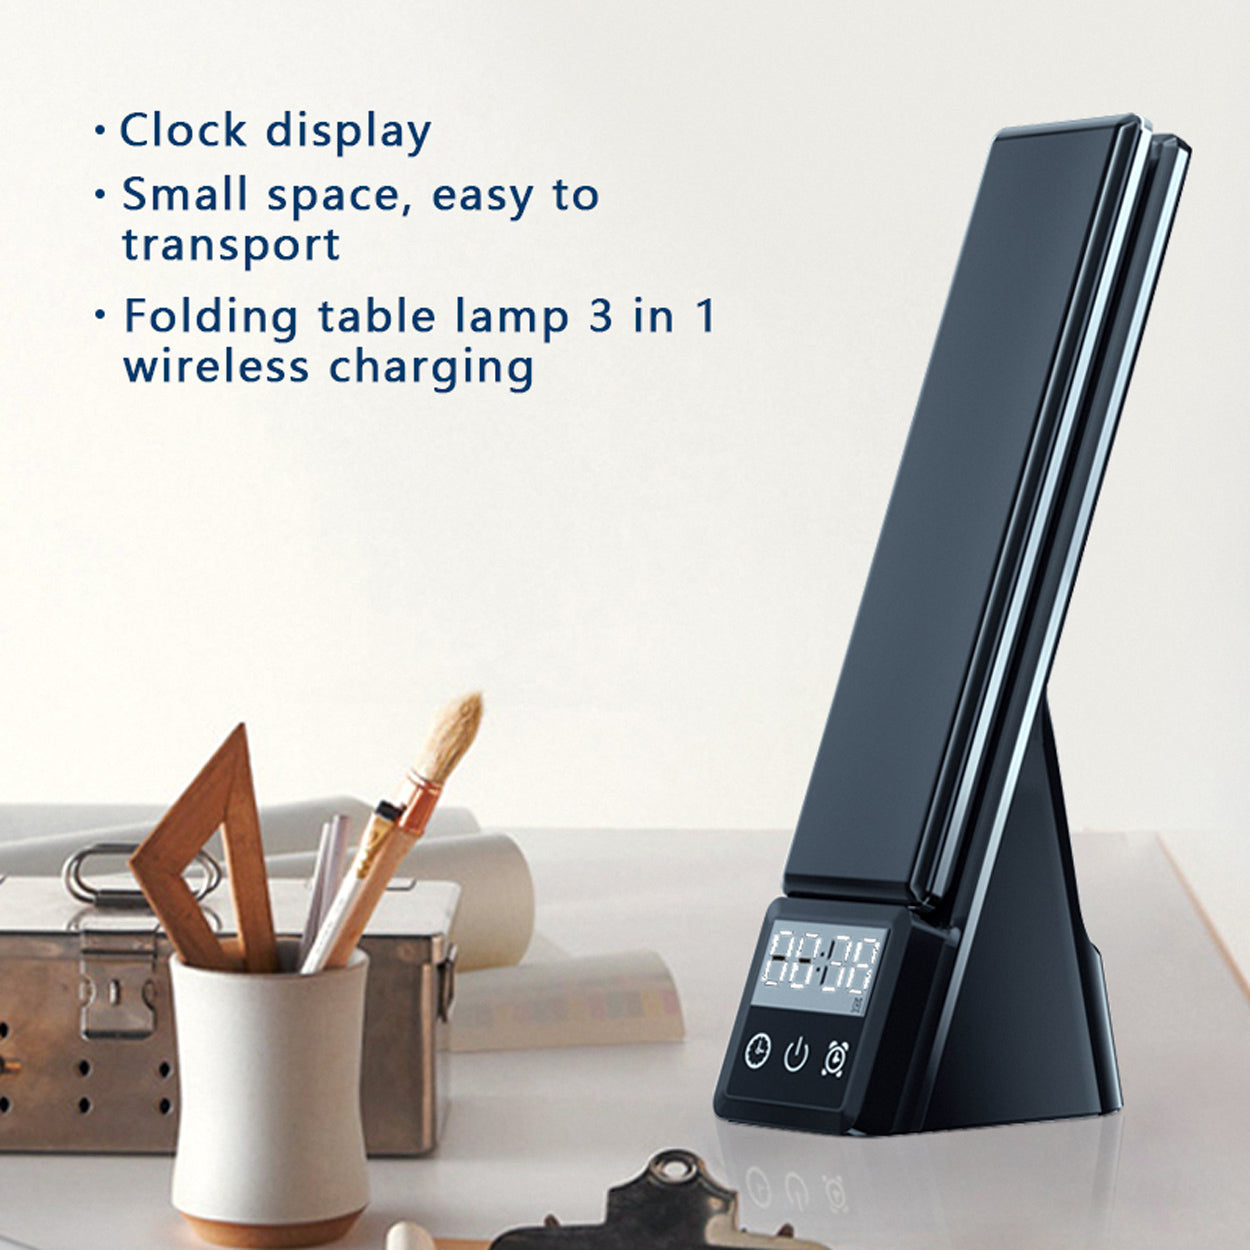 Magnetic Wireless Charging Station Table Lamp - 3